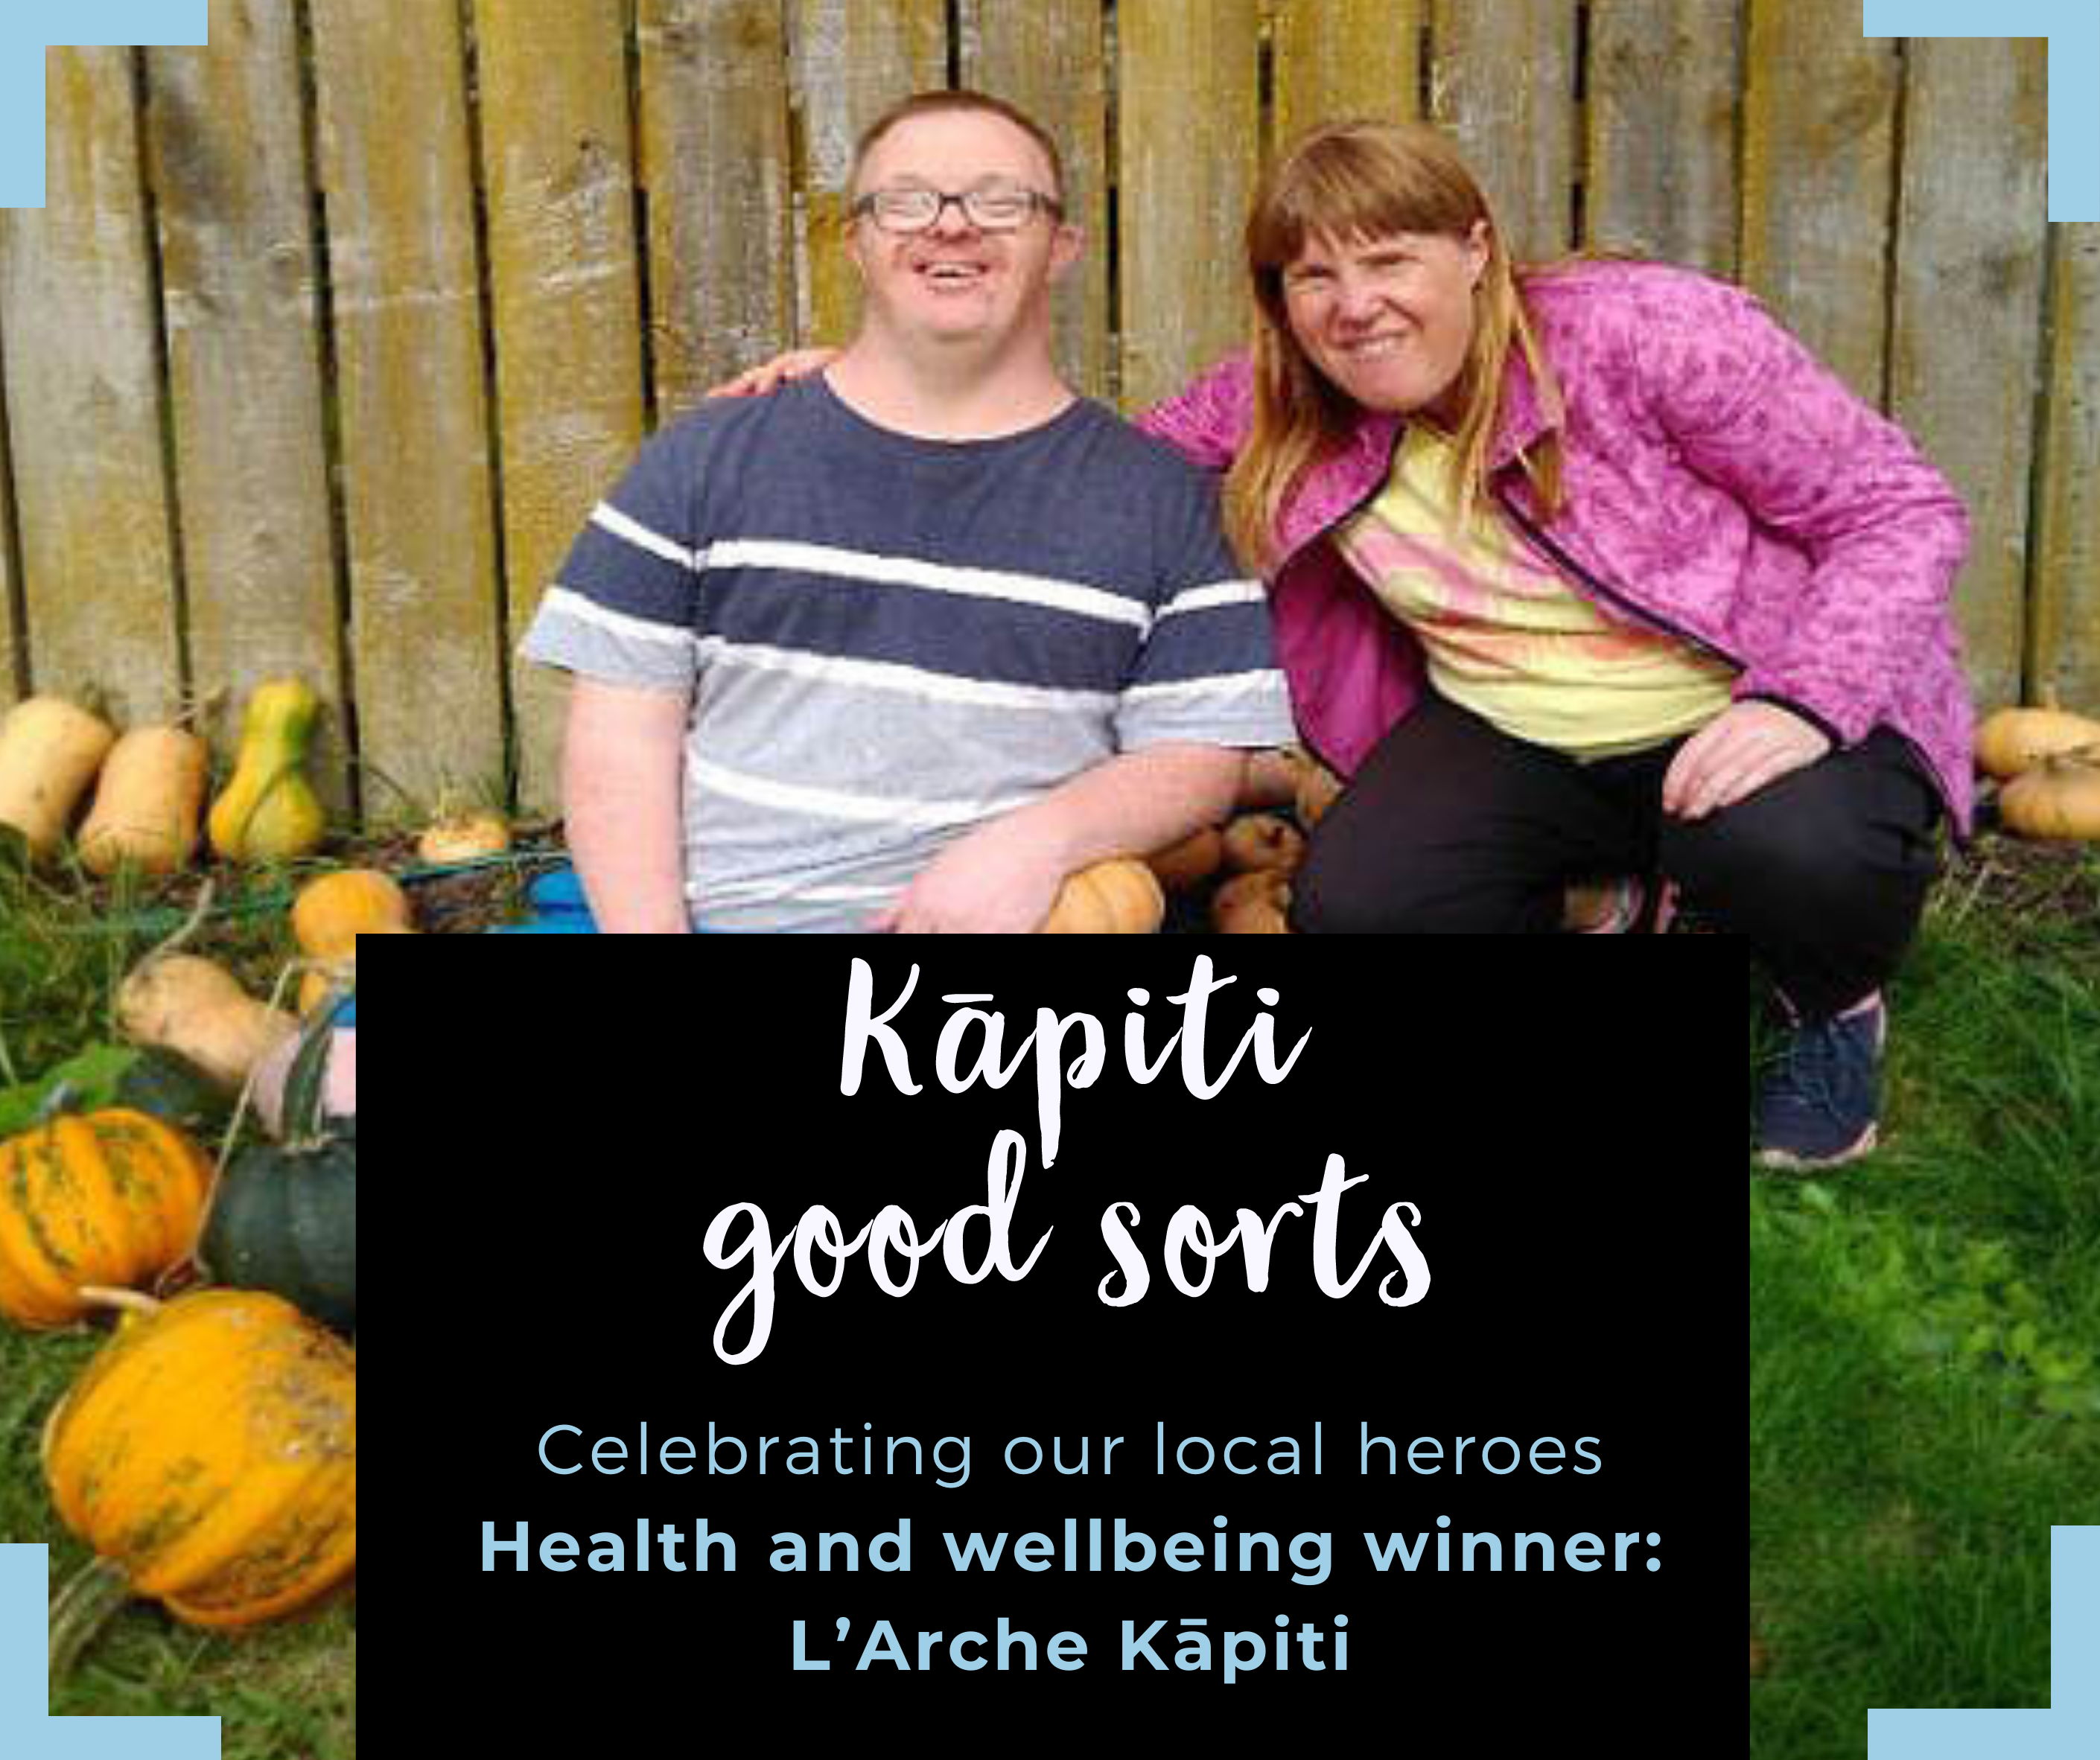 Photo of good sorts from the L'Arche Kāpiti community